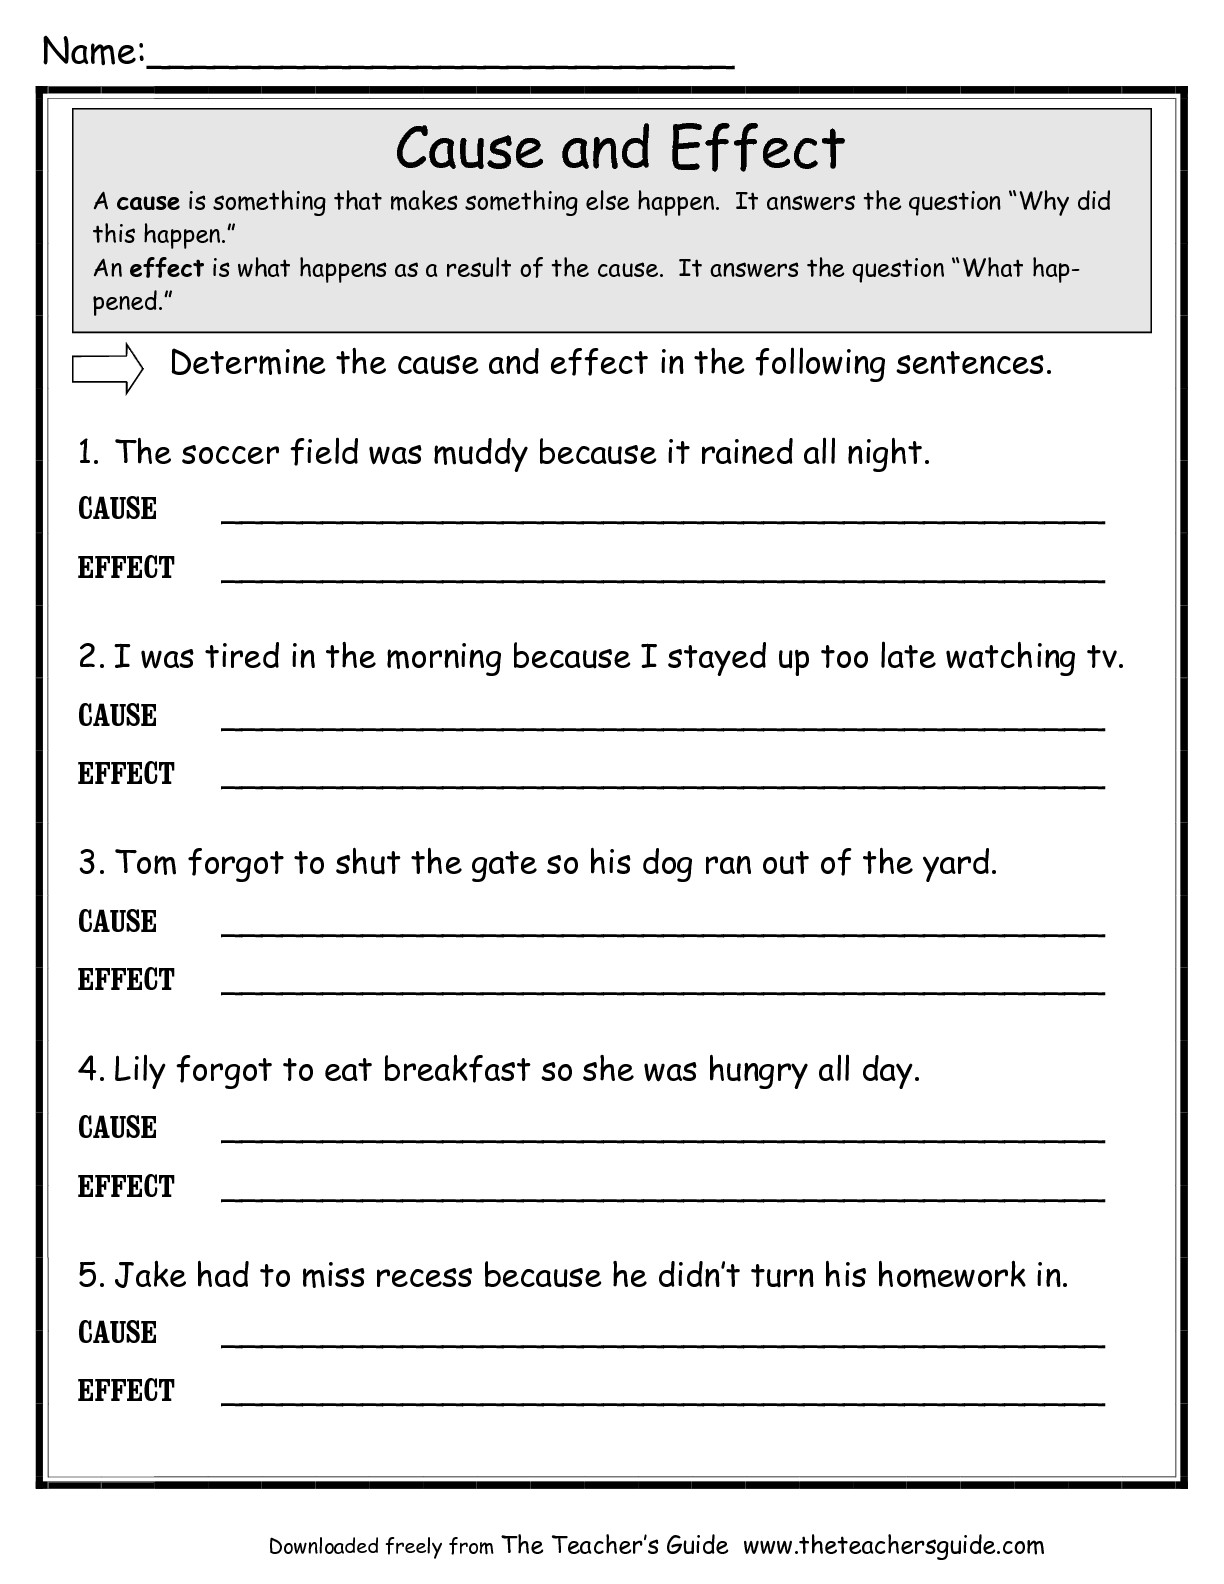 16-best-images-of-cause-and-effect-sentences-worksheet-free-cause-and-effect-worksheets-cause